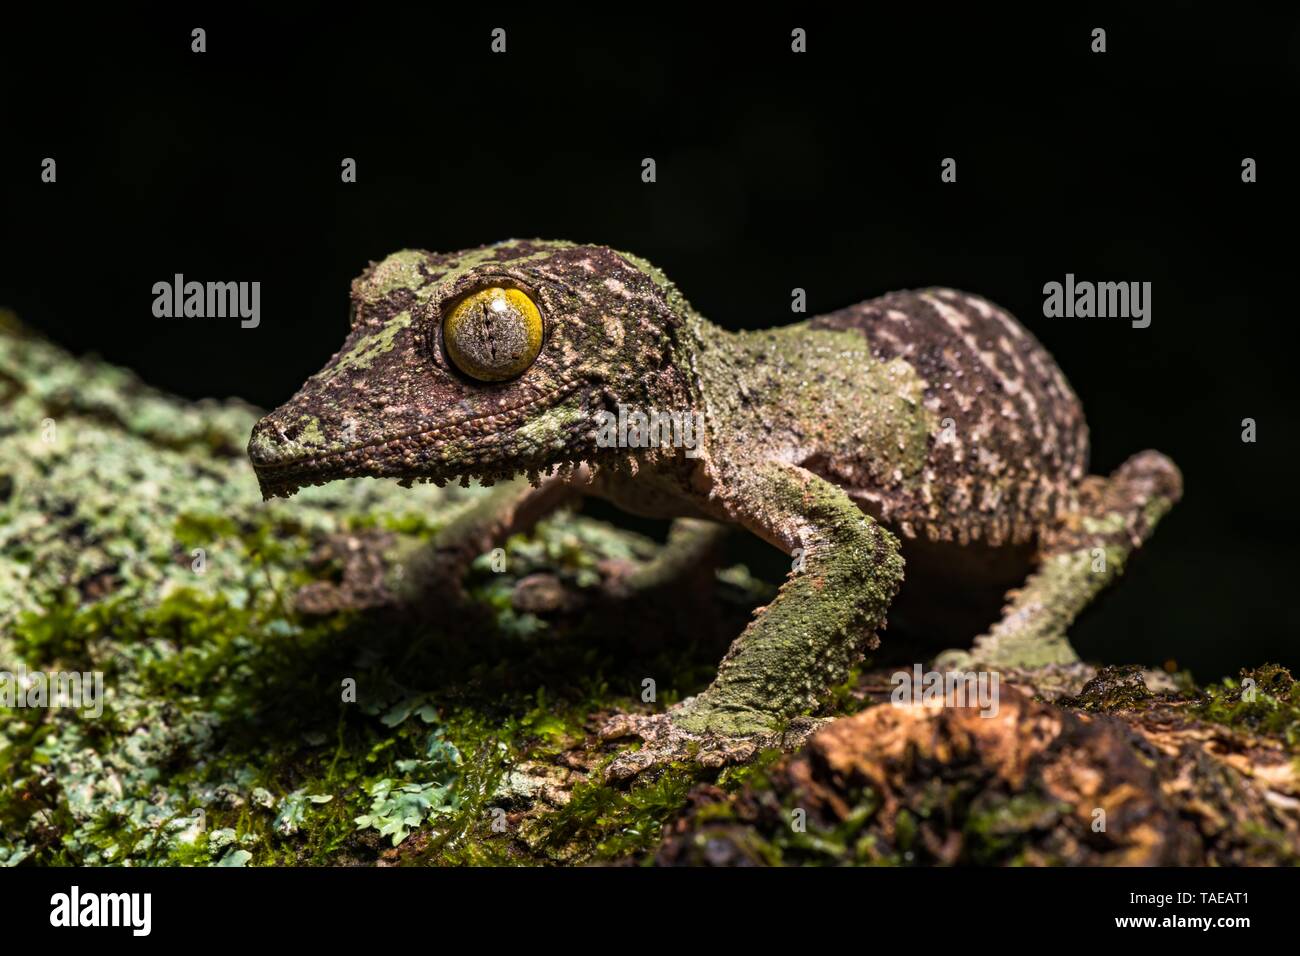 Mossy leaf-tailed gecko (Uroplatus sikorae), on a mossed tree trunk in the rainforest, Montagne d'Ambre, North Madagascar, Madagascar Stock Photo